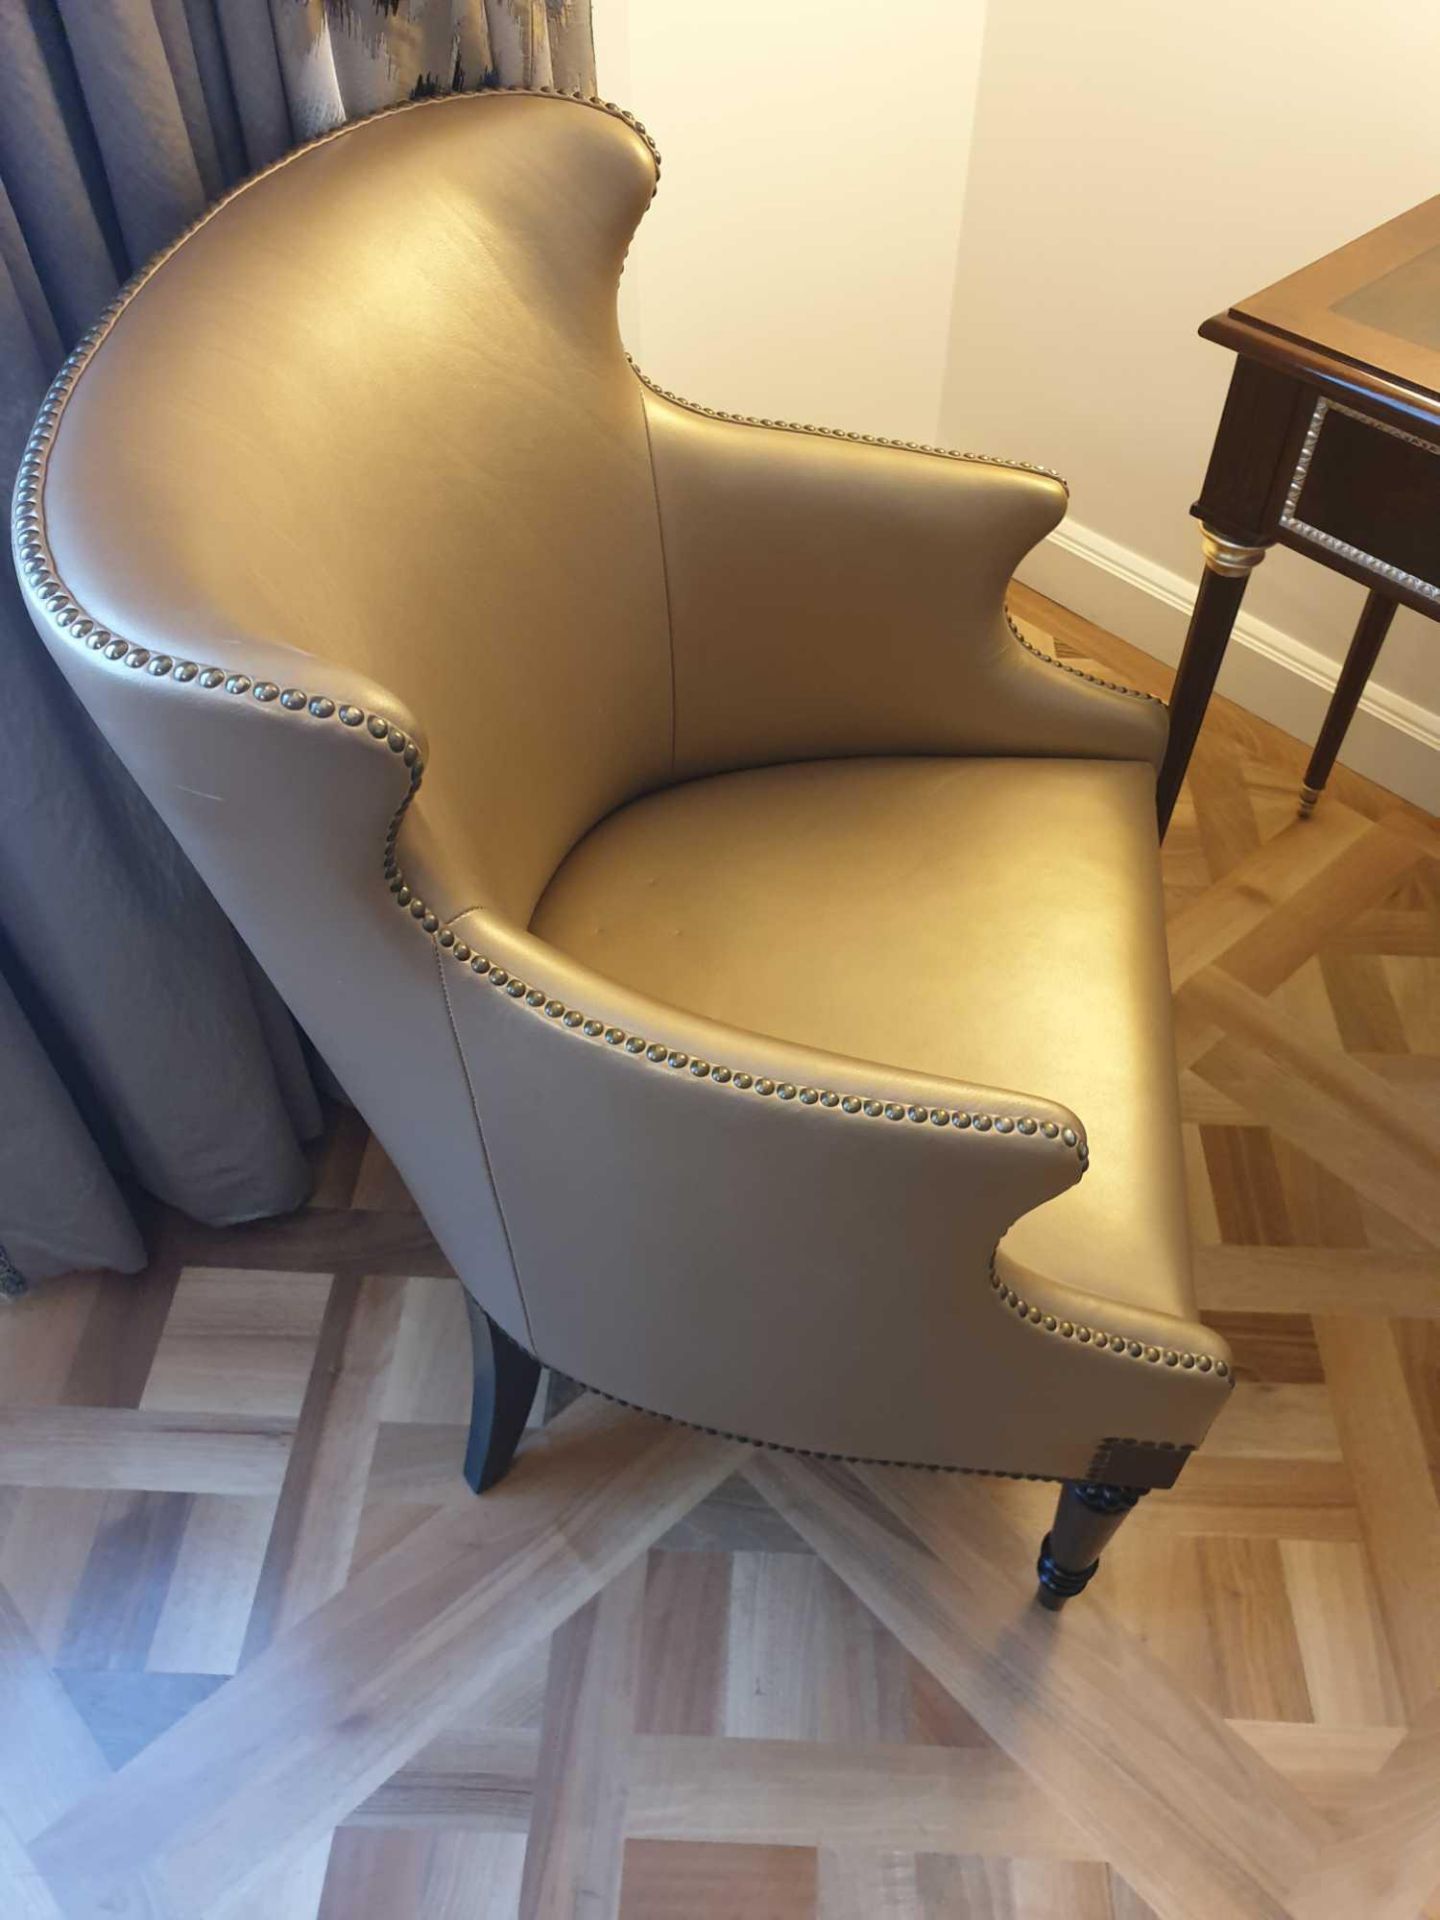 A Modern Wing Back Chair Upholstered In Gold Leather With Pin Stud Detail On Dark Solid Wood Frame - Image 2 of 3